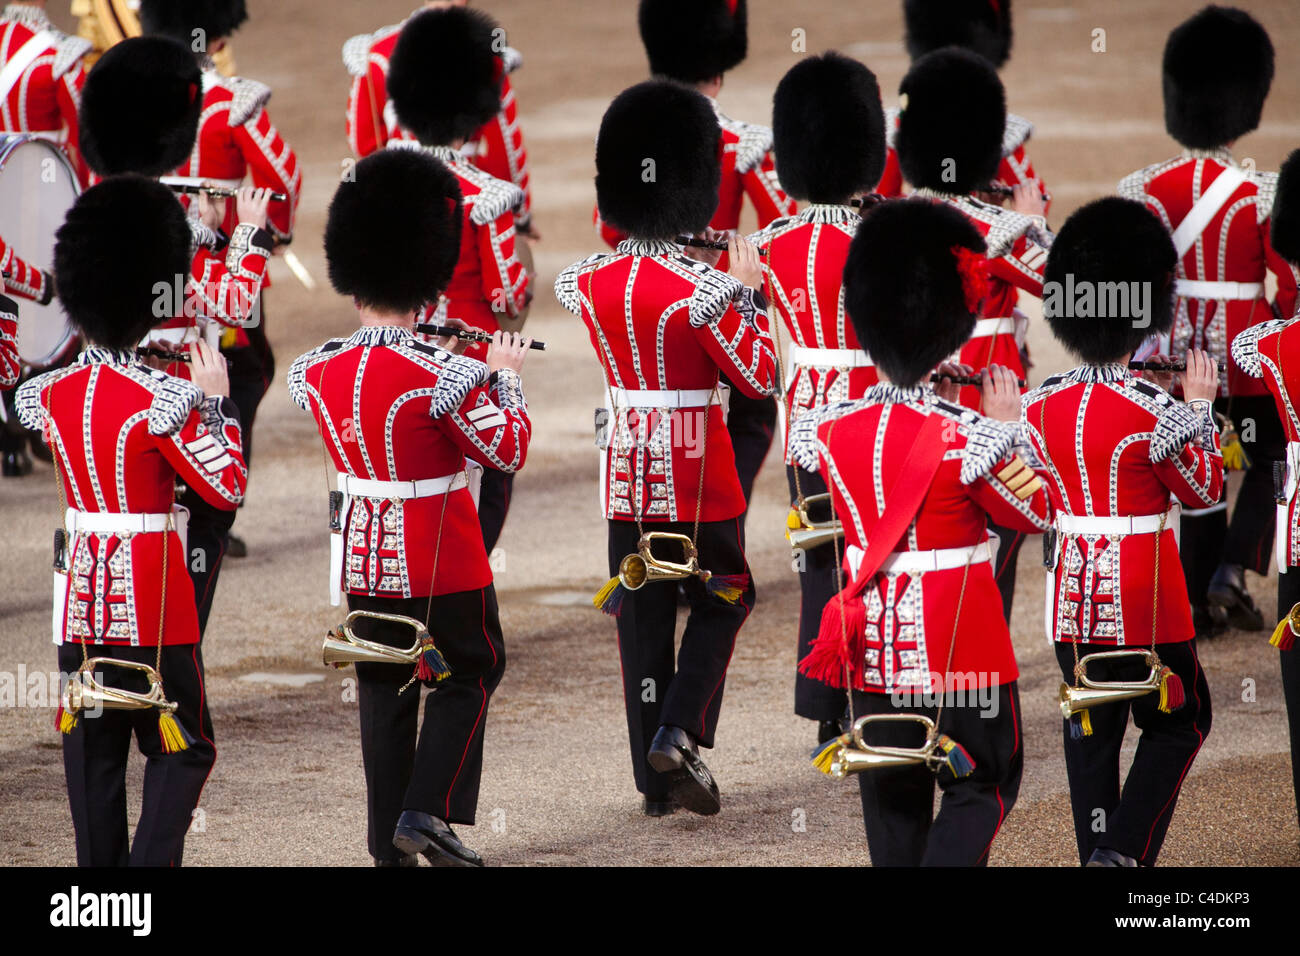 Buglers of the Massed Bands of the Household Division march and play at the annual Beating Retreat ceremony in London. Stock Photo